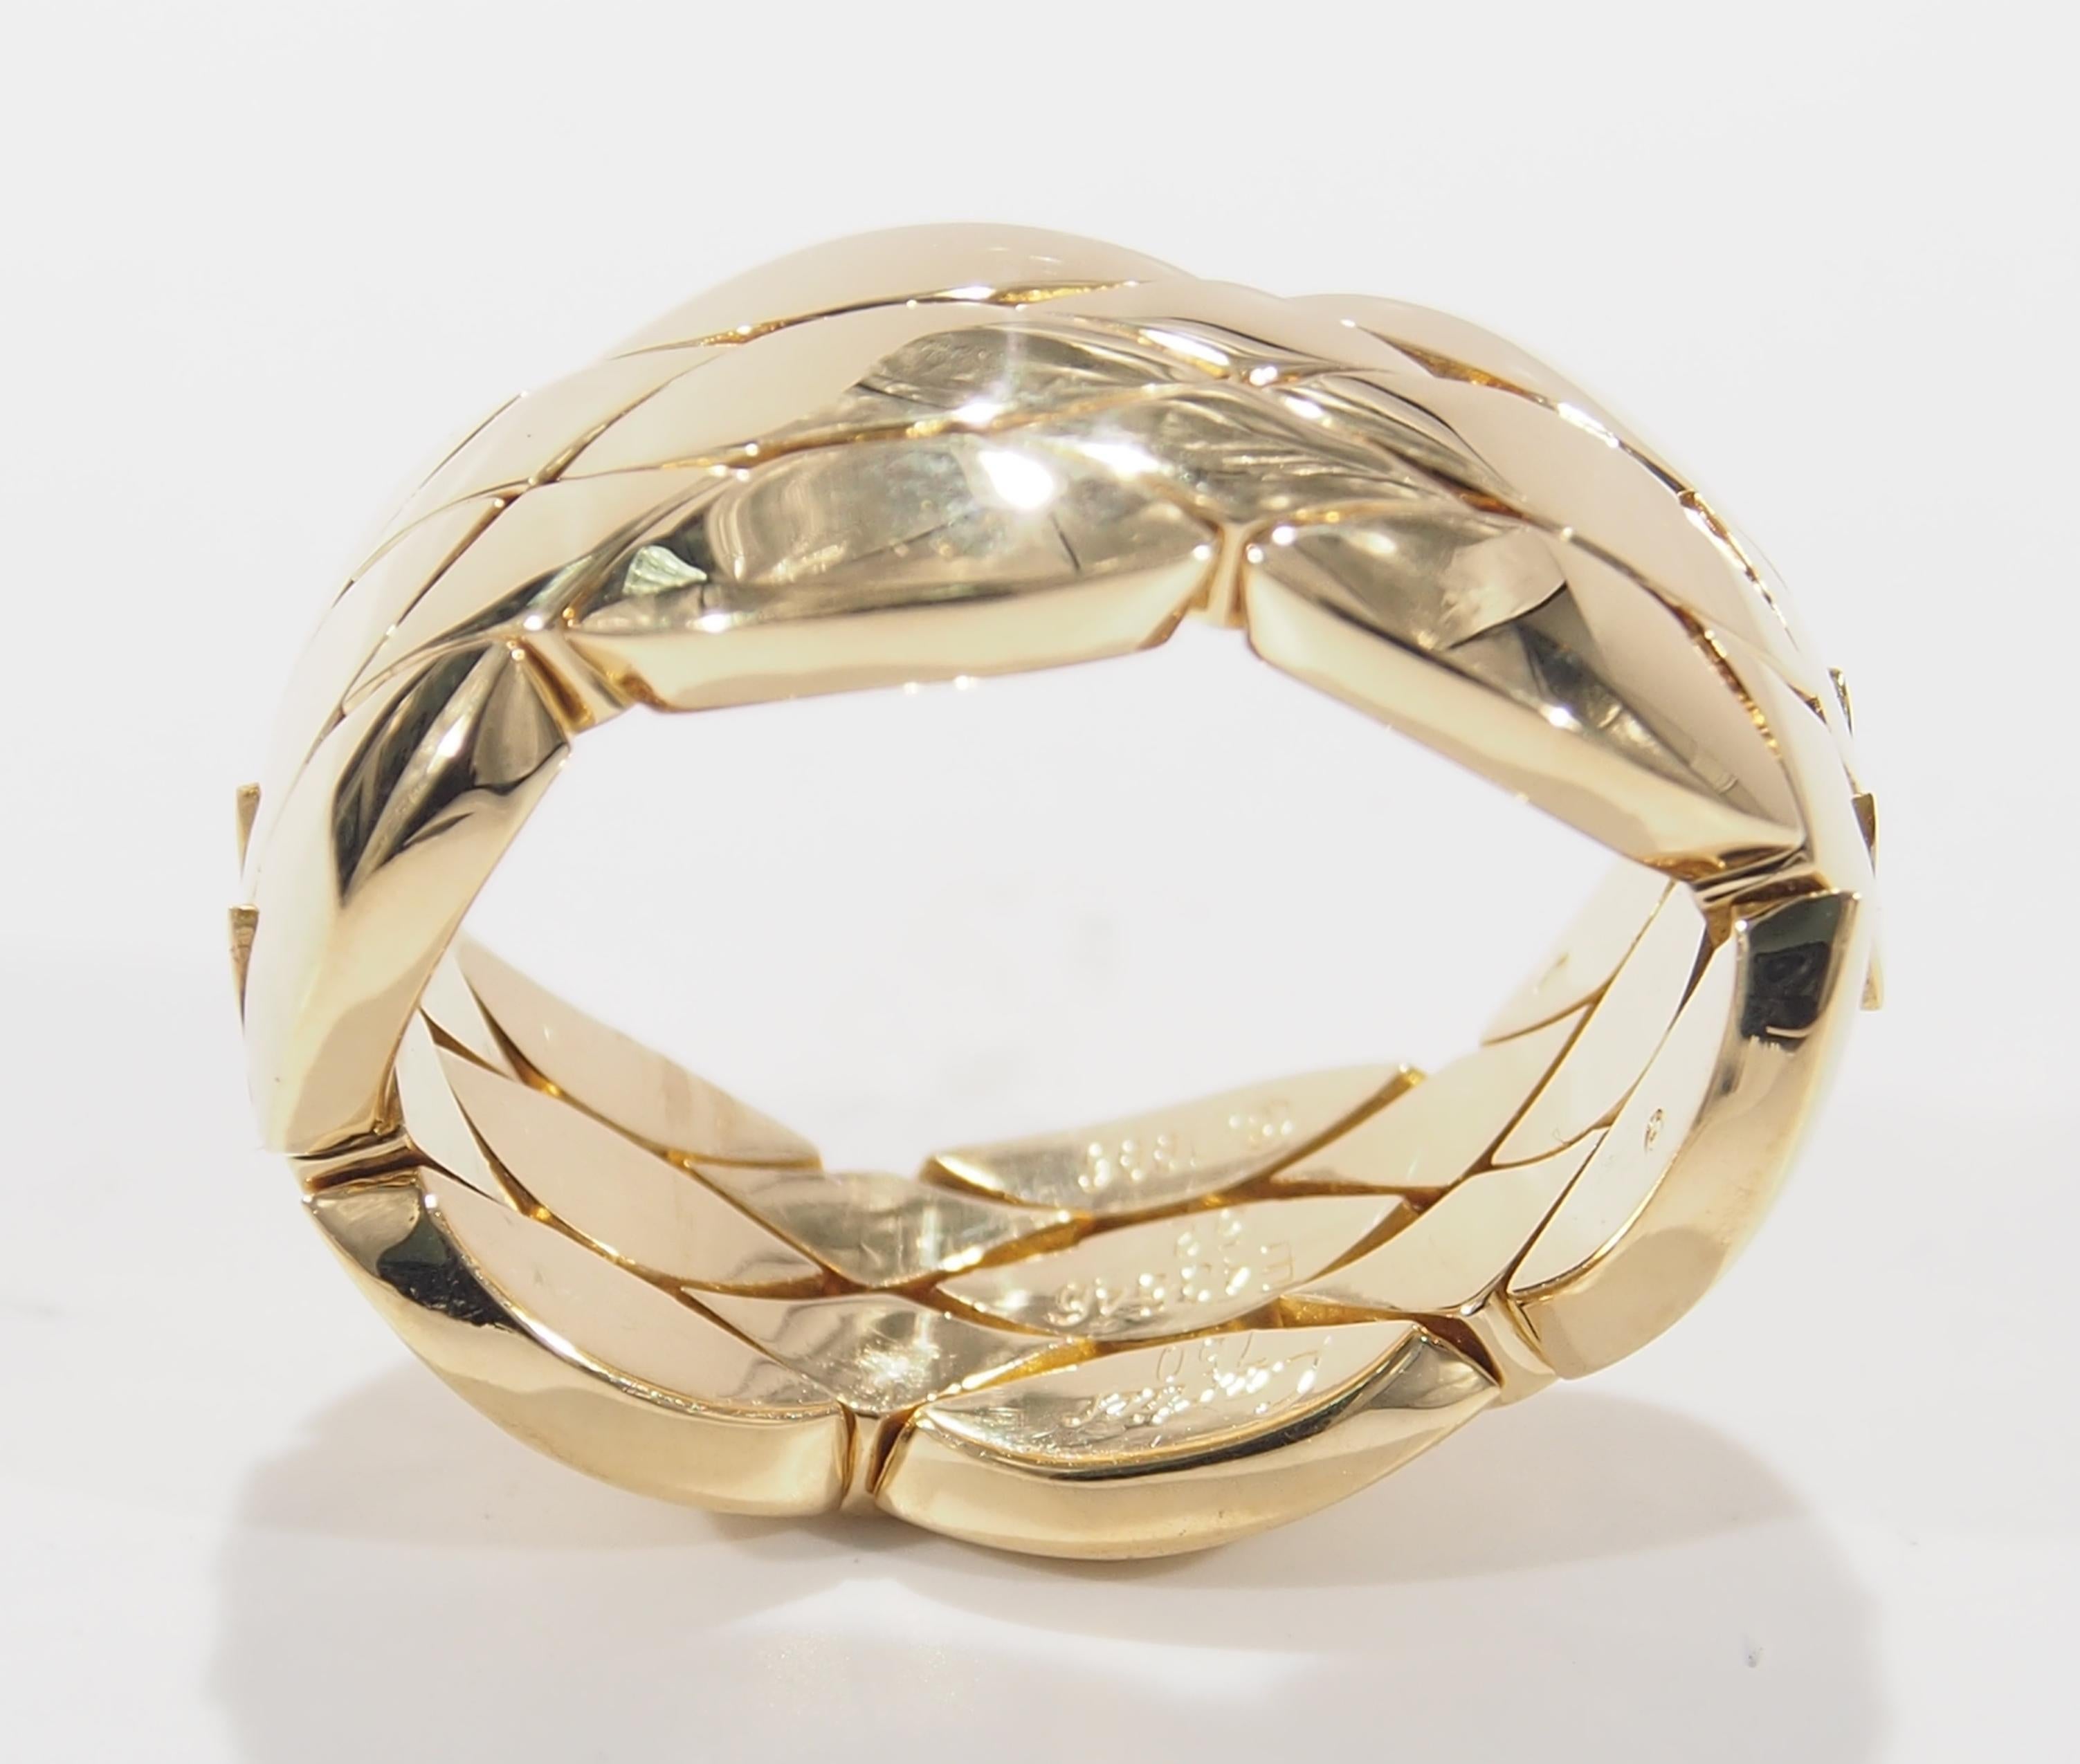 From the iconic Jewelry Designer, Cartier is their 18K Yellow Gold Ring. This stunning Ring is a flexible band style and is Hallmarked 